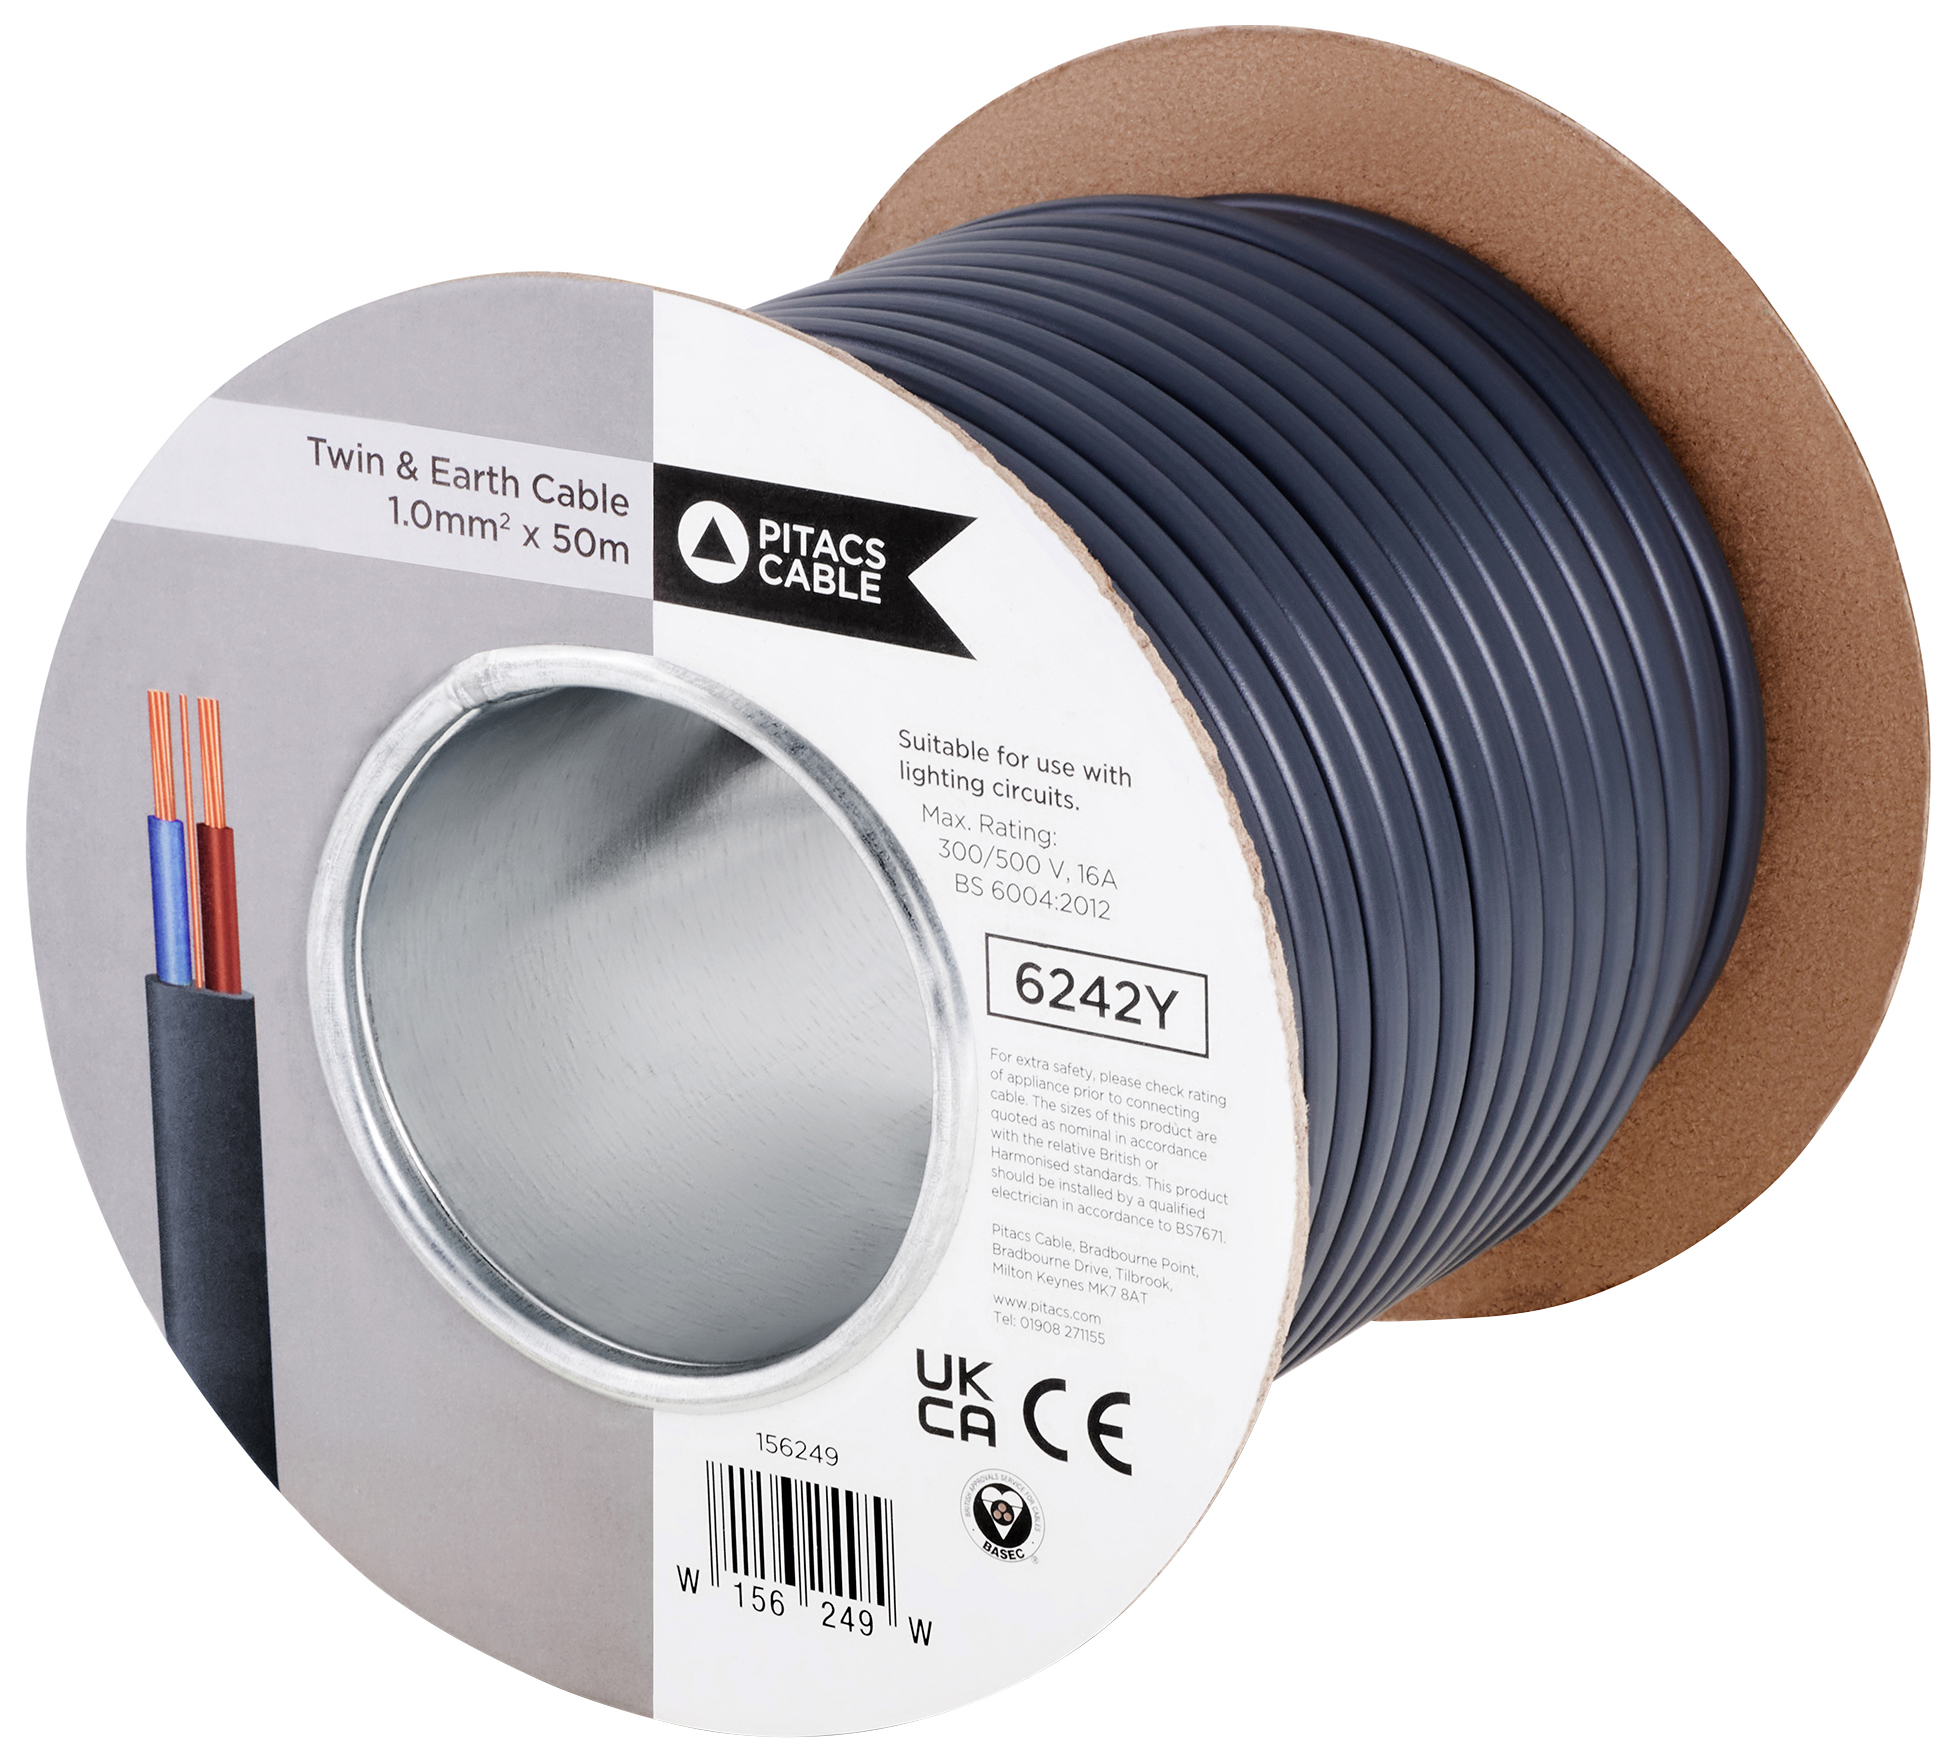 Twin & Earth Cable - 1mm2 x 50m